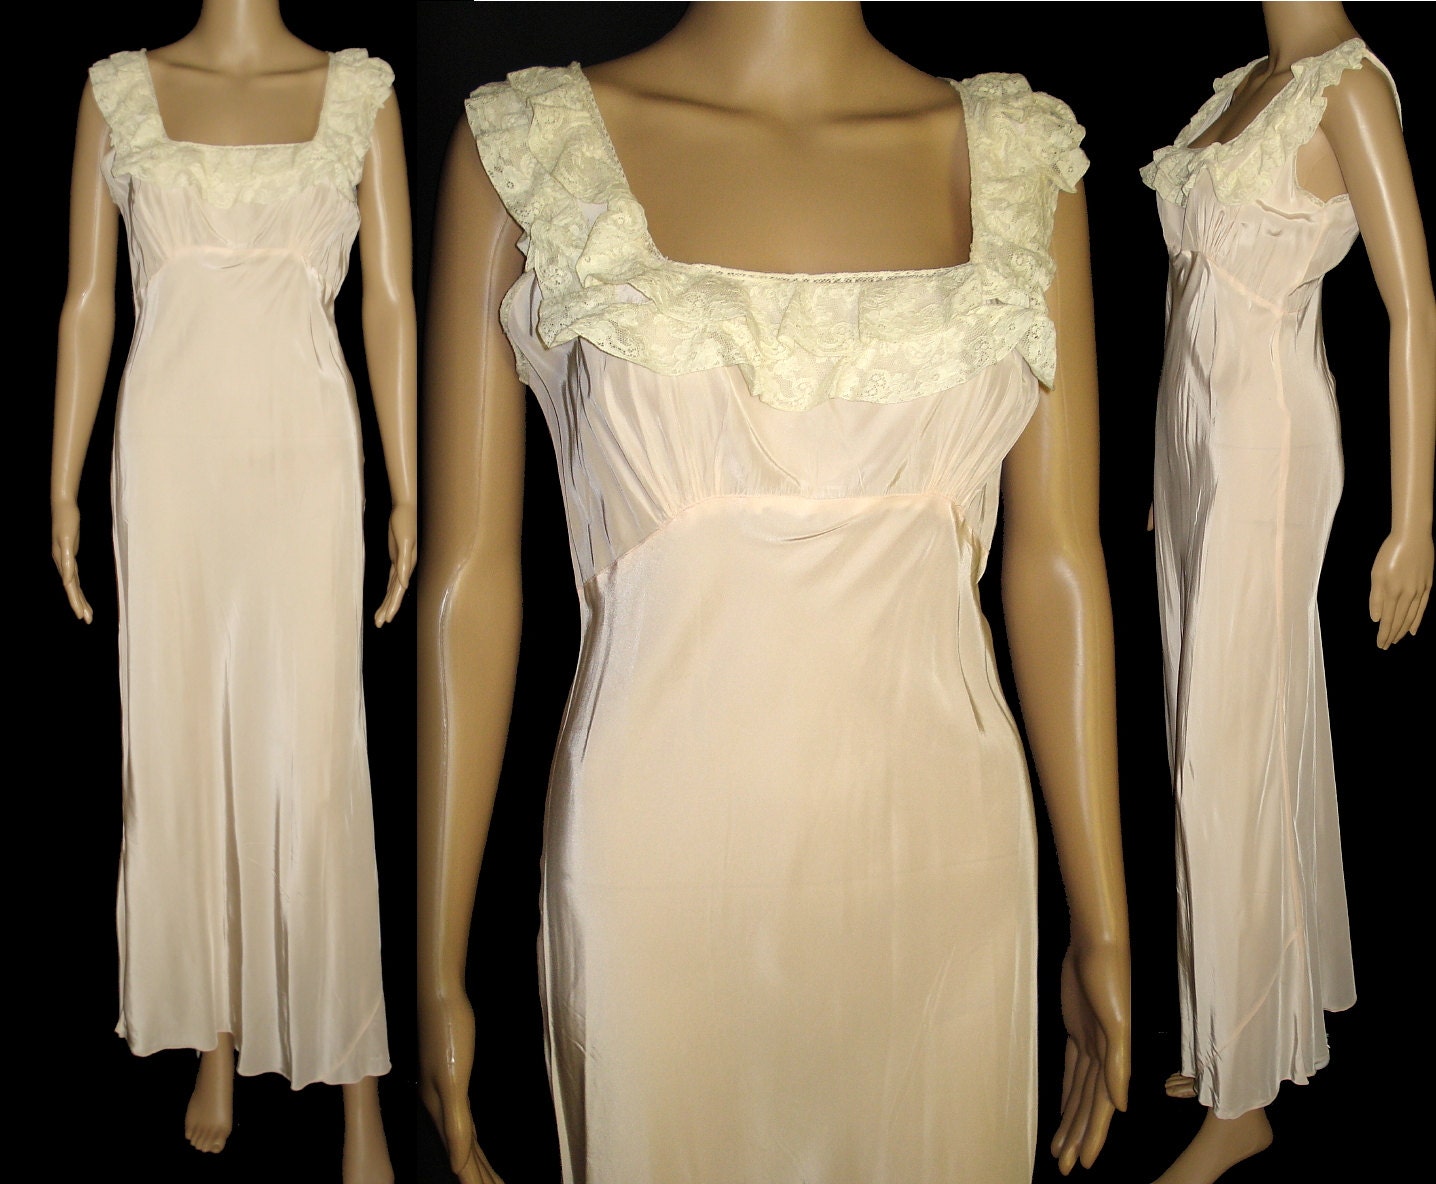 Vintage 1930s Gown// Bias Cut//30s Gown//1930s Nightgown//